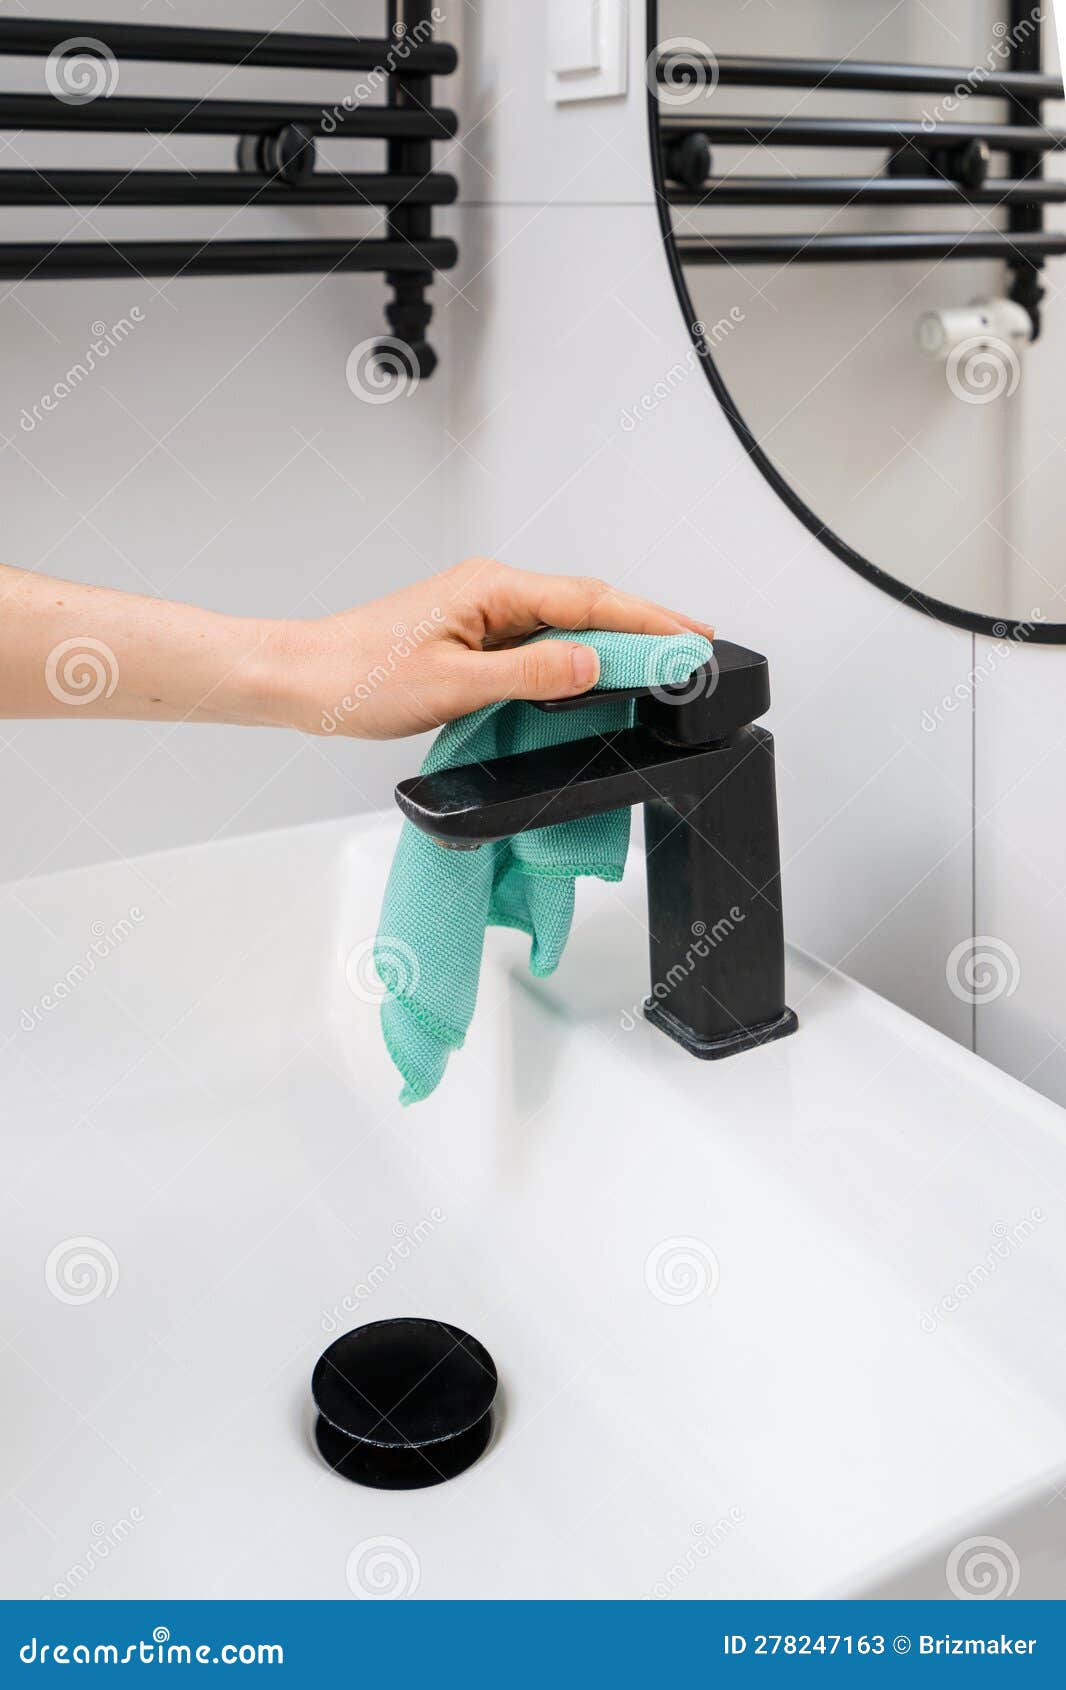 woman removing dirt and scale from water tap in bathroom